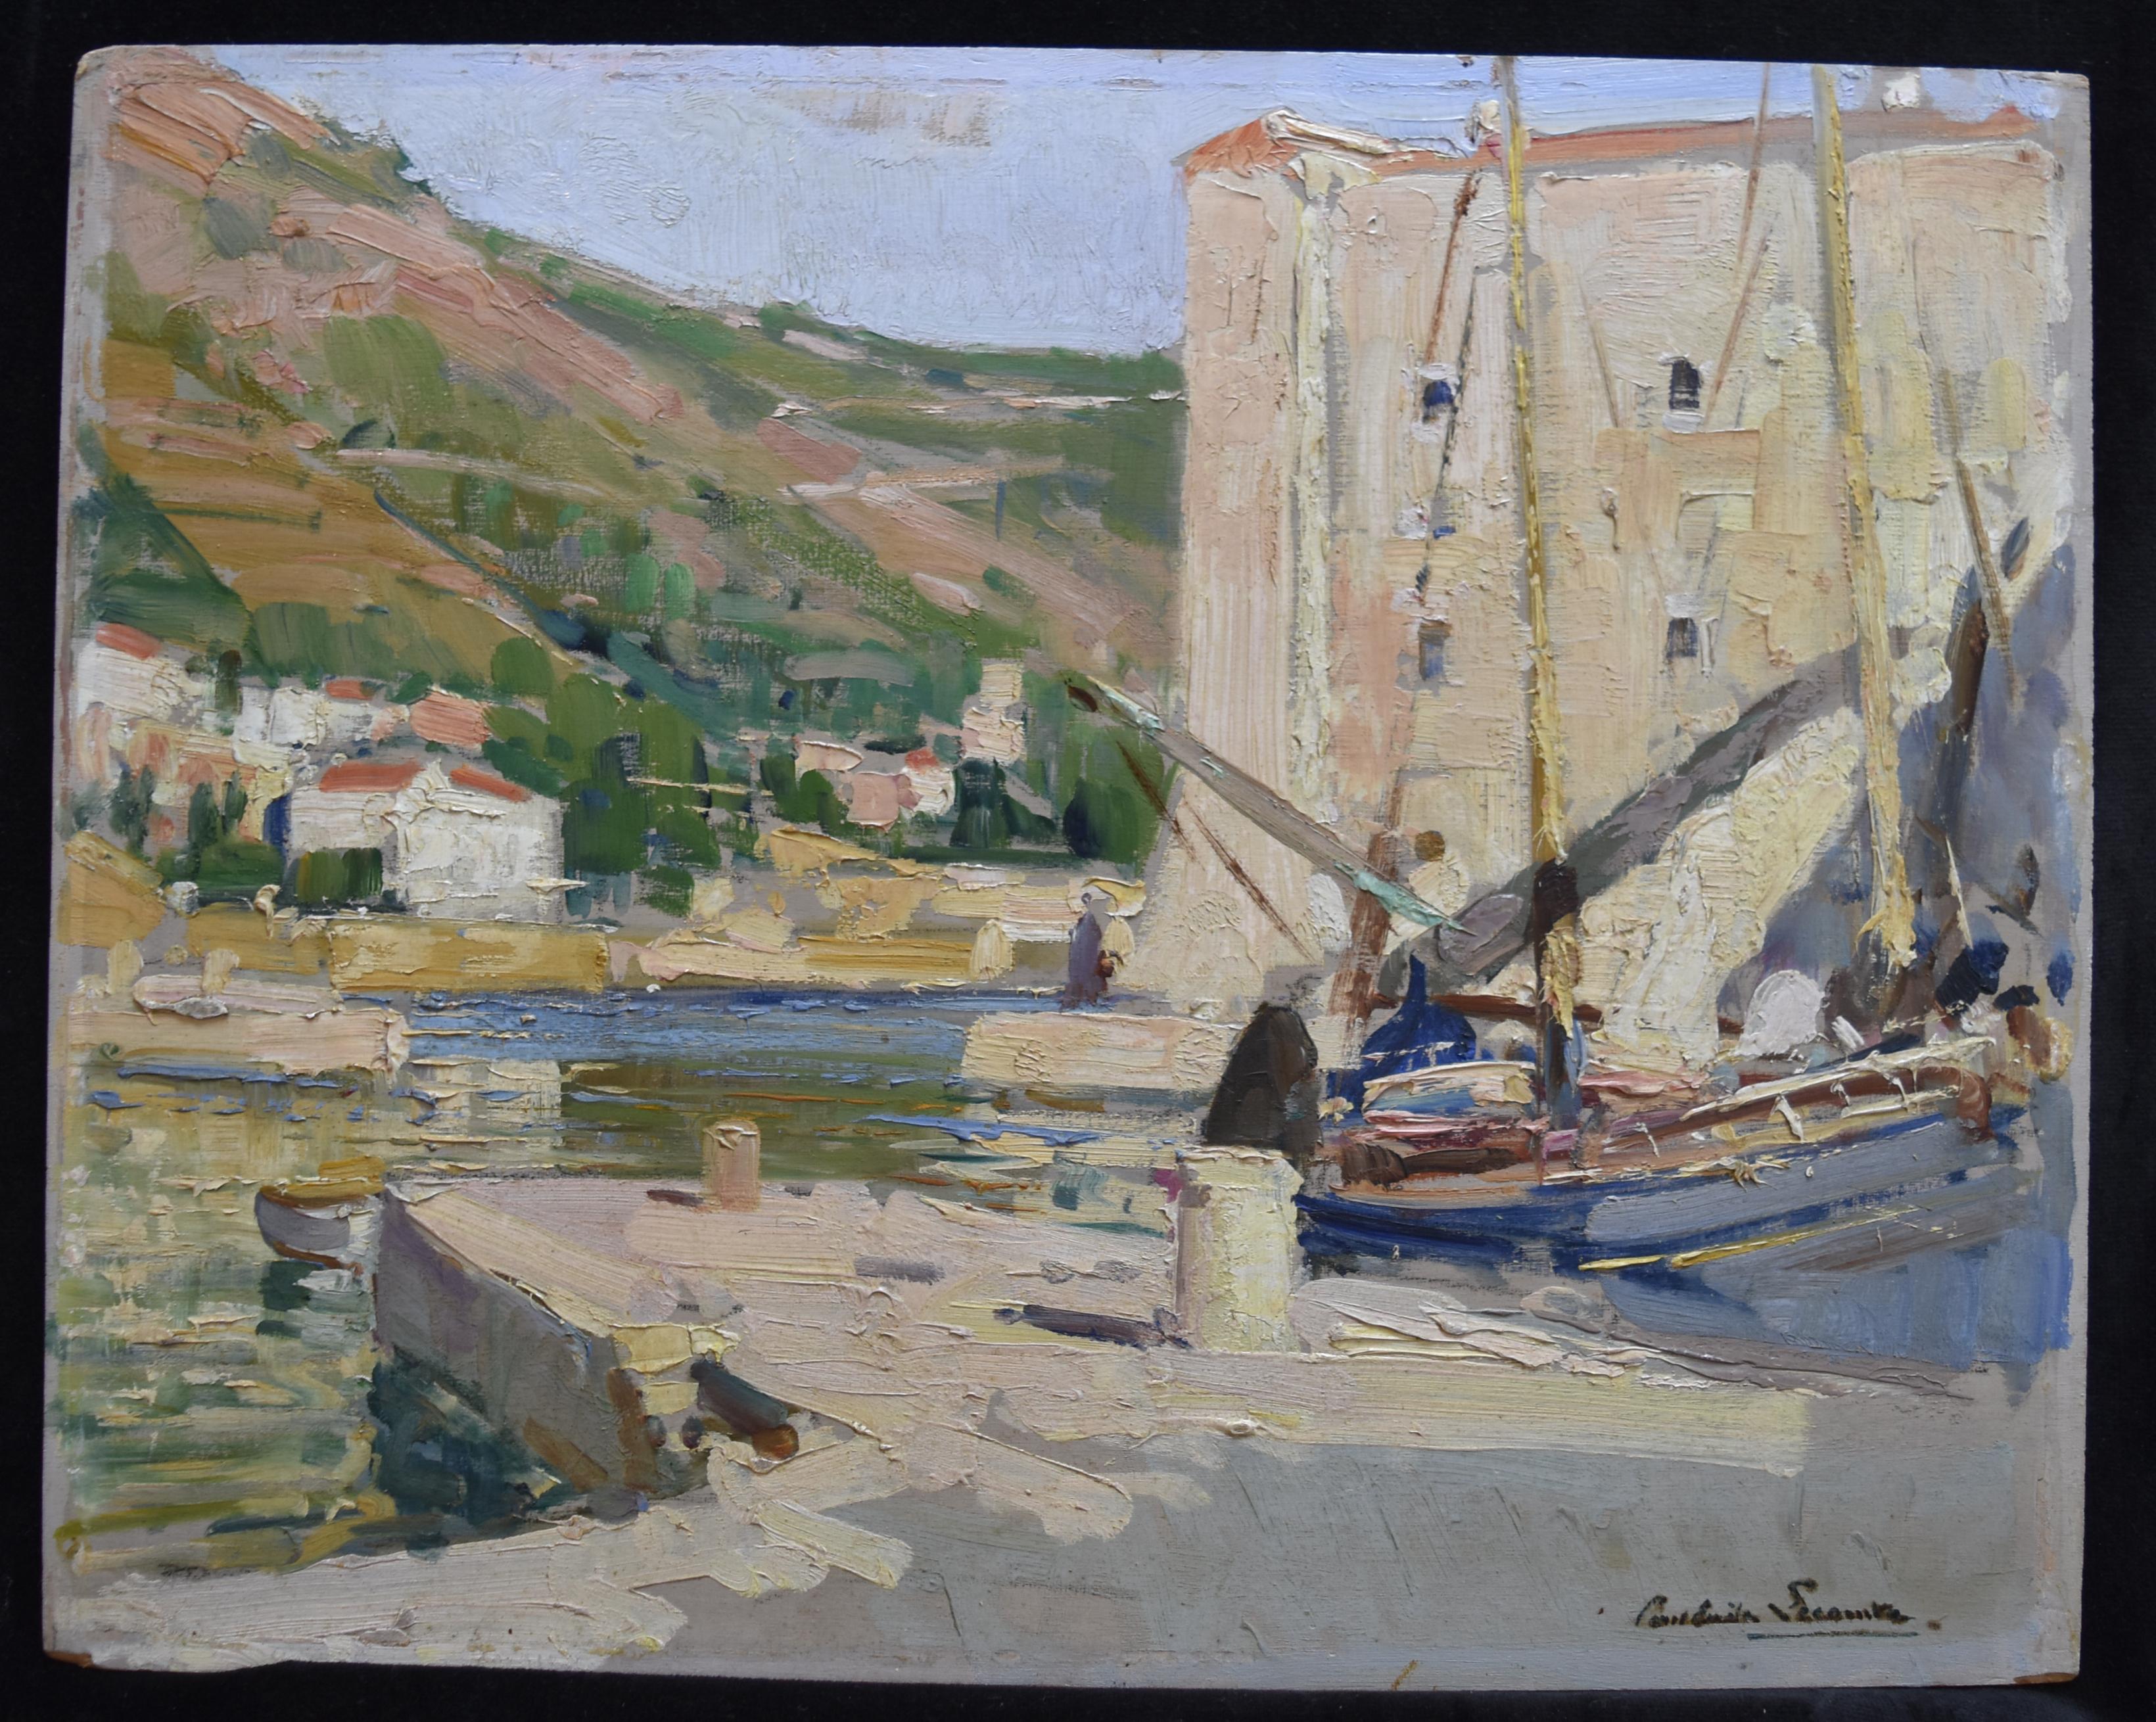 Paul Emile Lecomte (1877-1950)
A harbor in south France
Signed lower right
Oil on board
33 x 41 cm 
Framed : 48 x 55 cm

Paul Emile Lecomte (1877– 1950). Painter of watercolors and oil paintings, etcher, and engraver. He was the pupil of Fernand